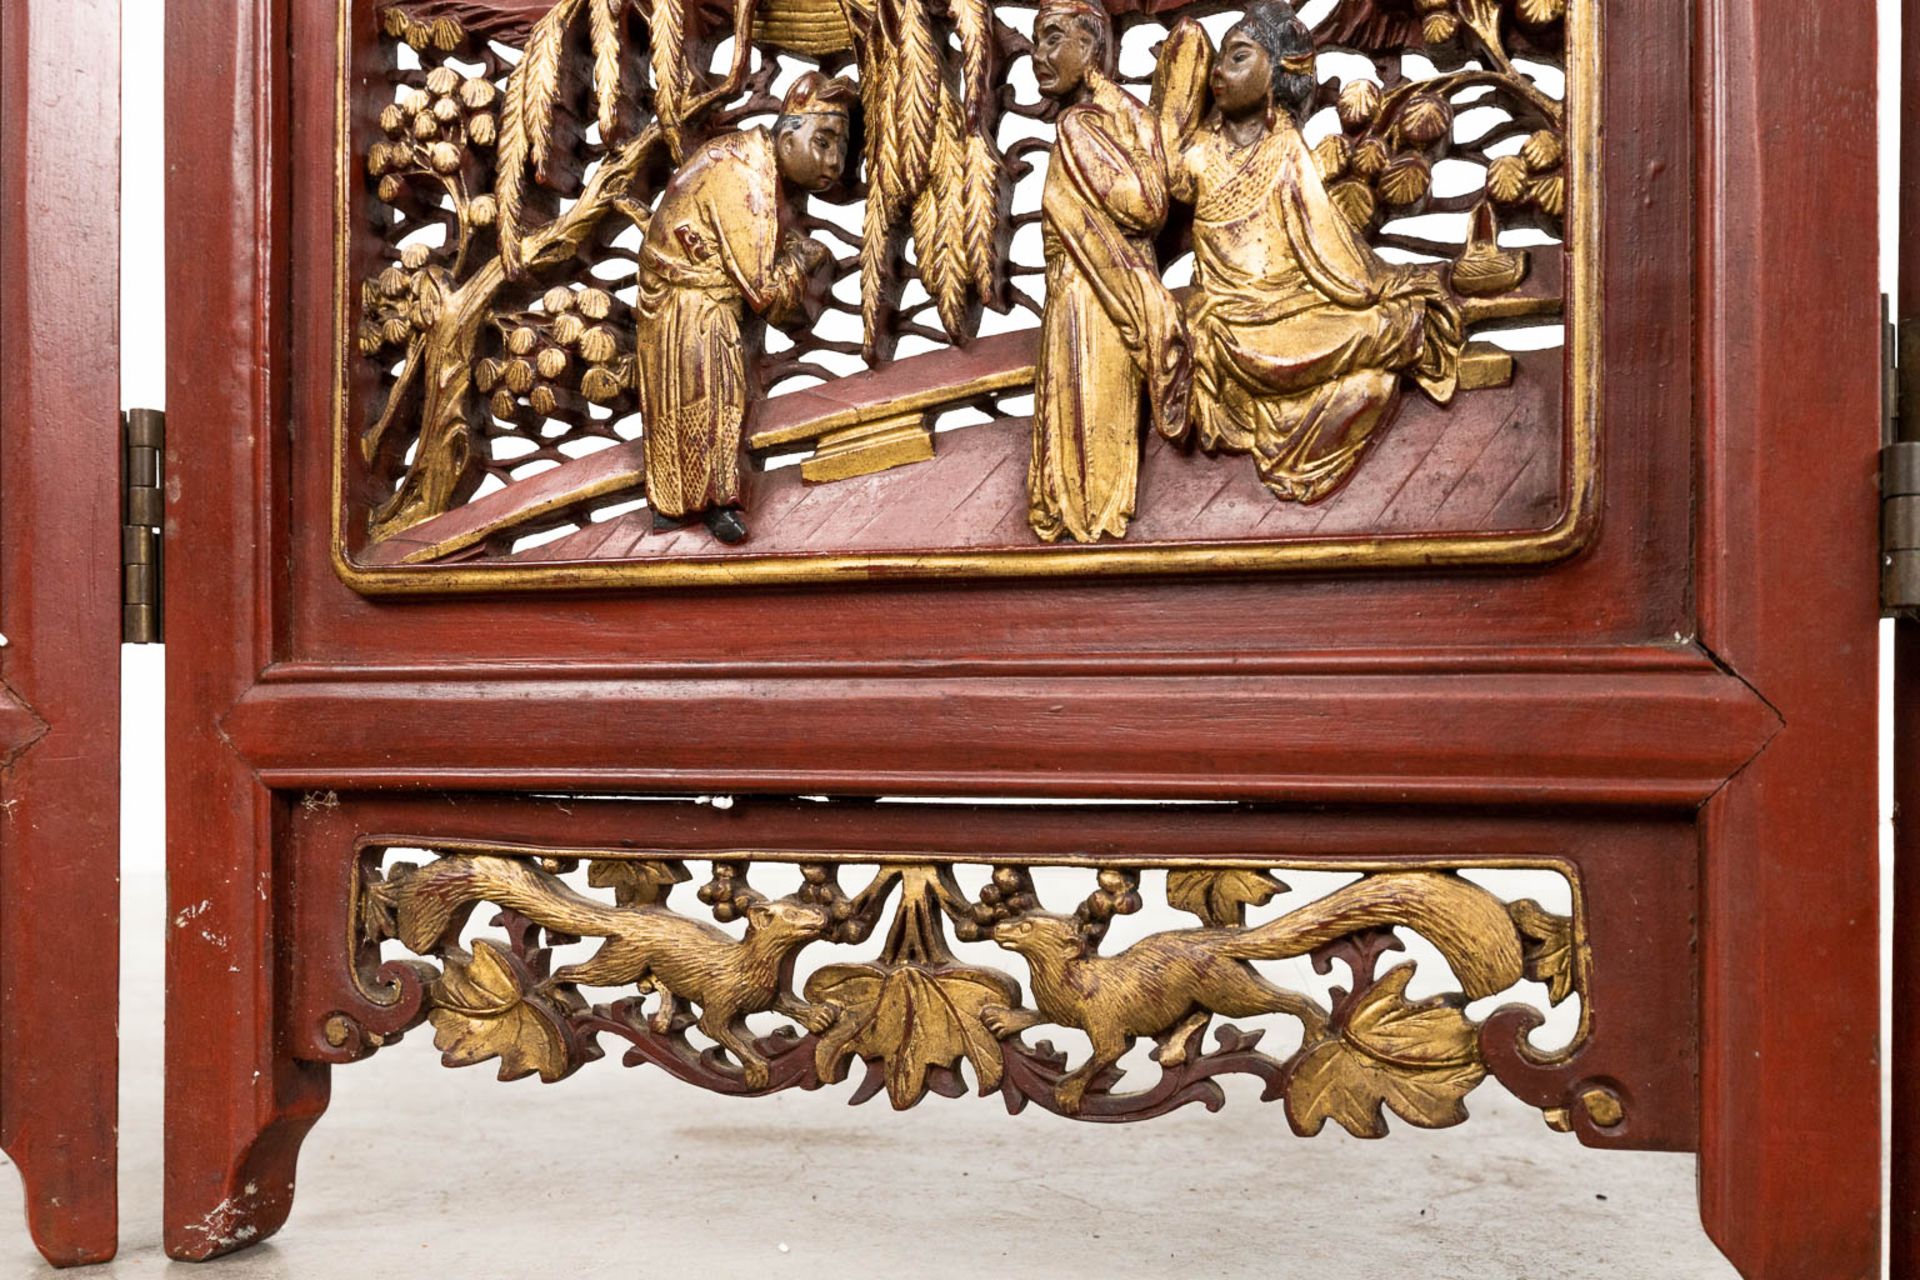 A 4-piece Chinese room divider, sculptured hardwood panels, circa 1900. (W:162 x H:185 cm) - Image 11 of 12